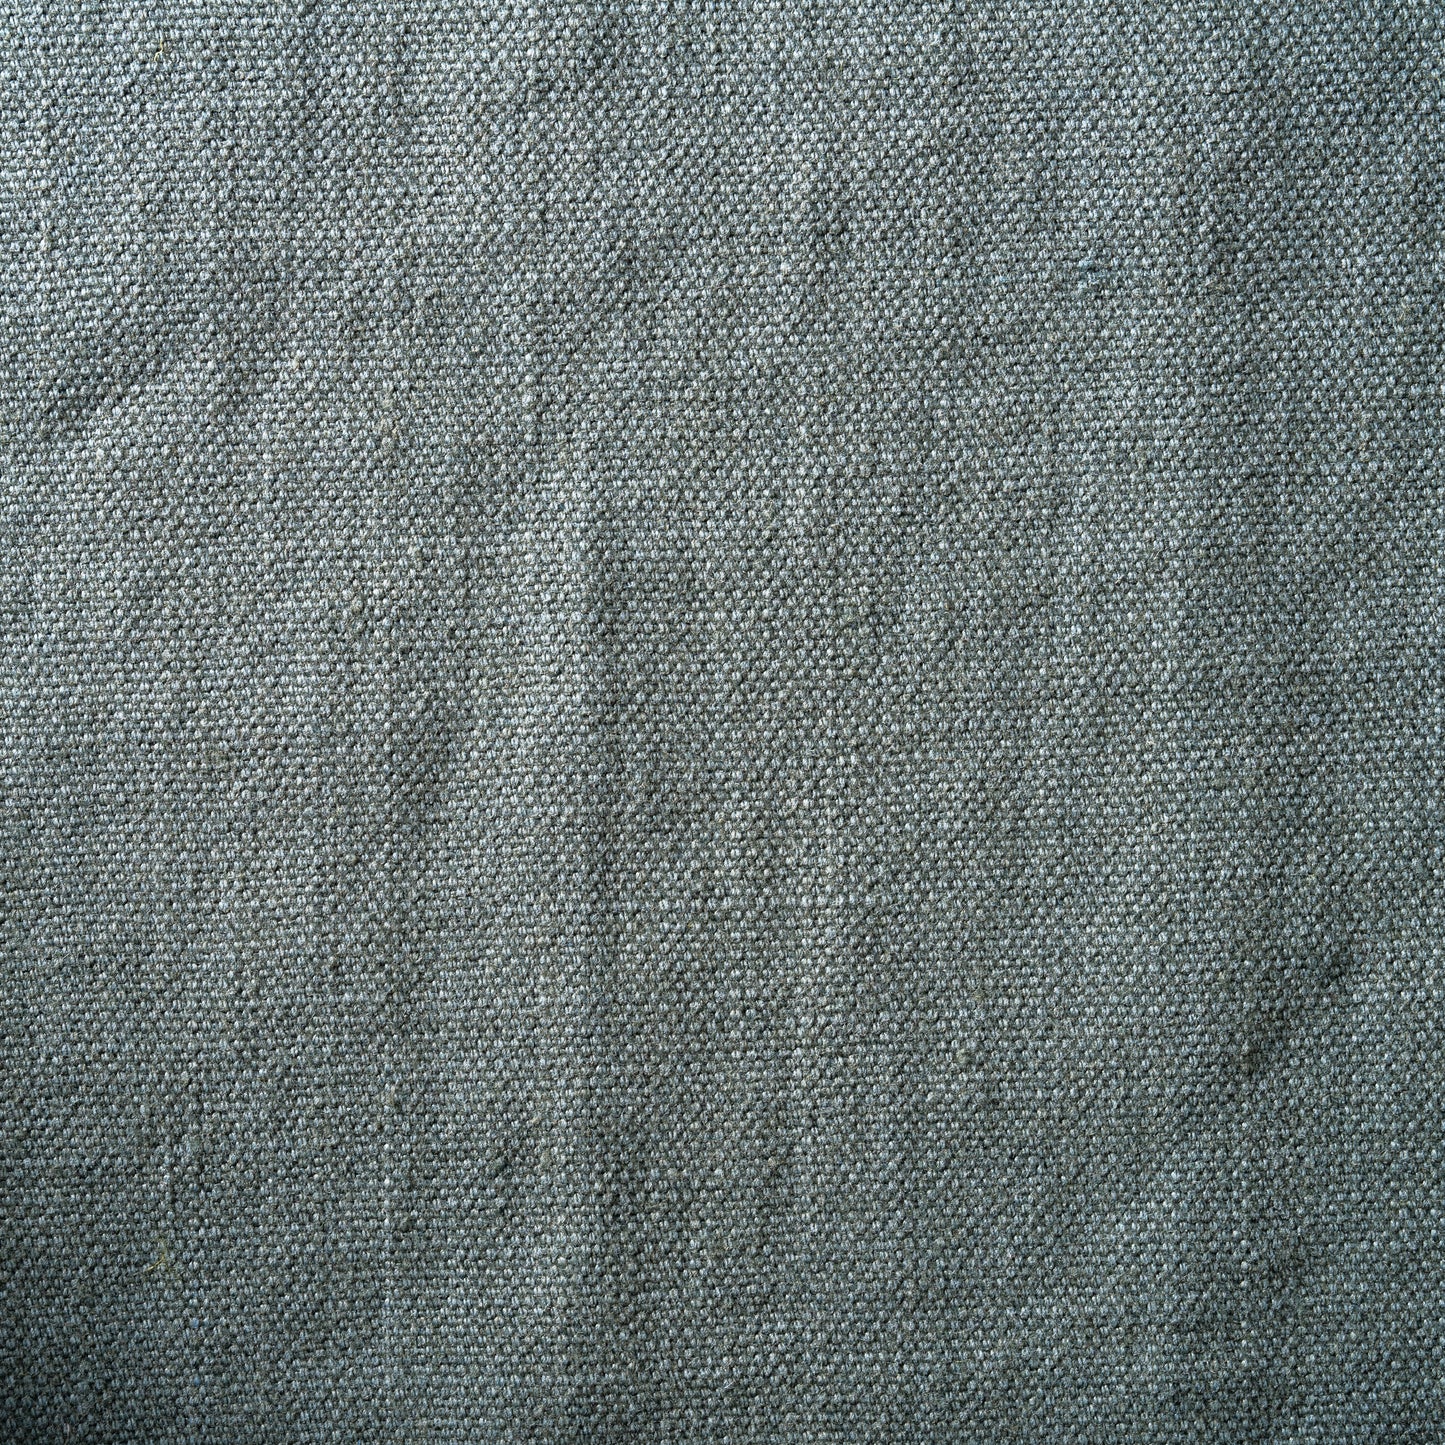 14.3 oz/sq yard 100% Upholstery/ Slipcover Weight Linen in Dusty Teal